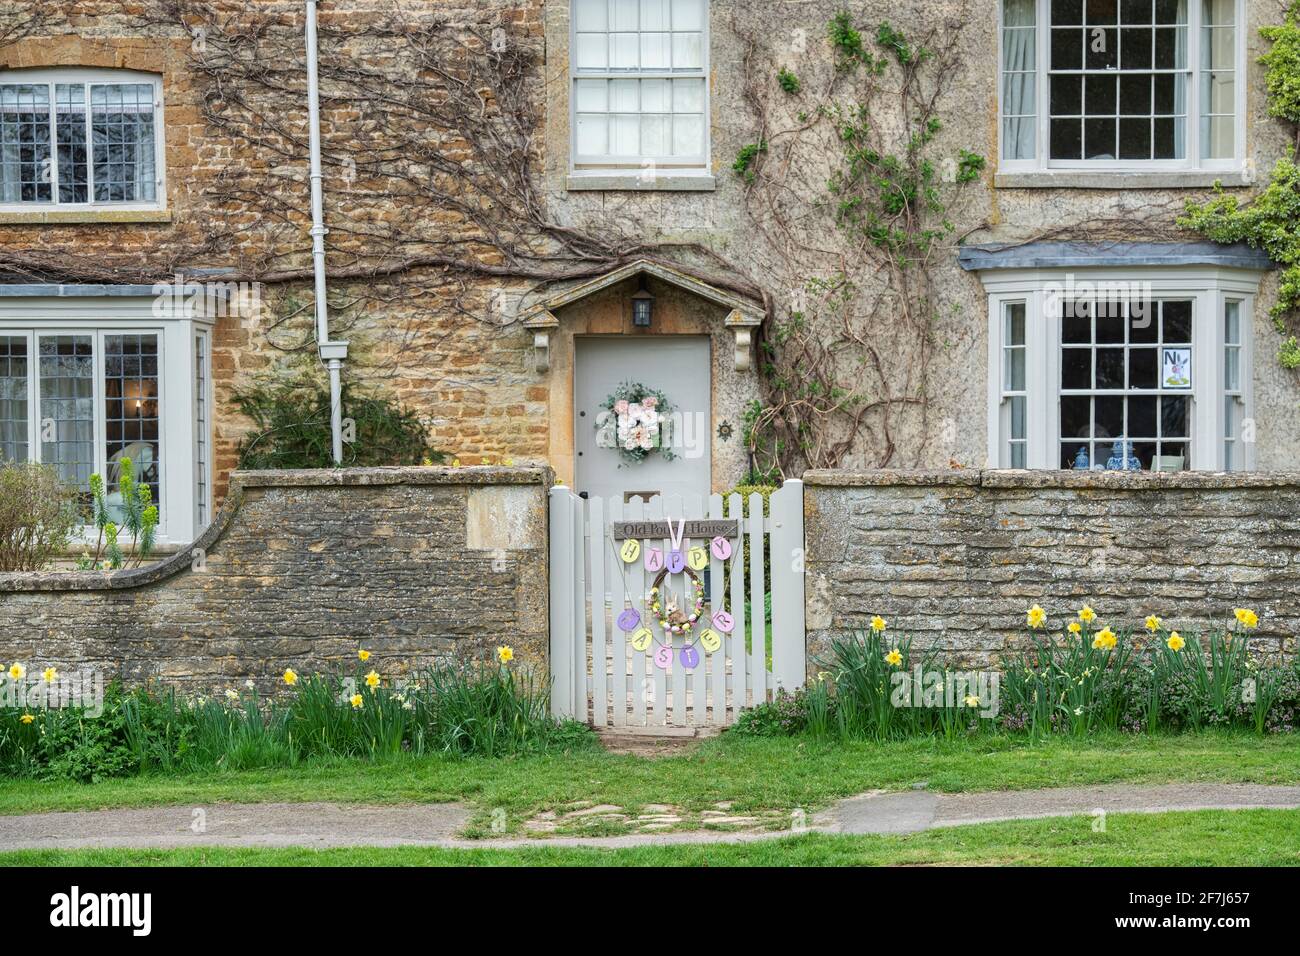 Easter decorations on the garden gate of a cotswold house. Kingham, Cotswolds, Oxfordshire, England Stock Photo